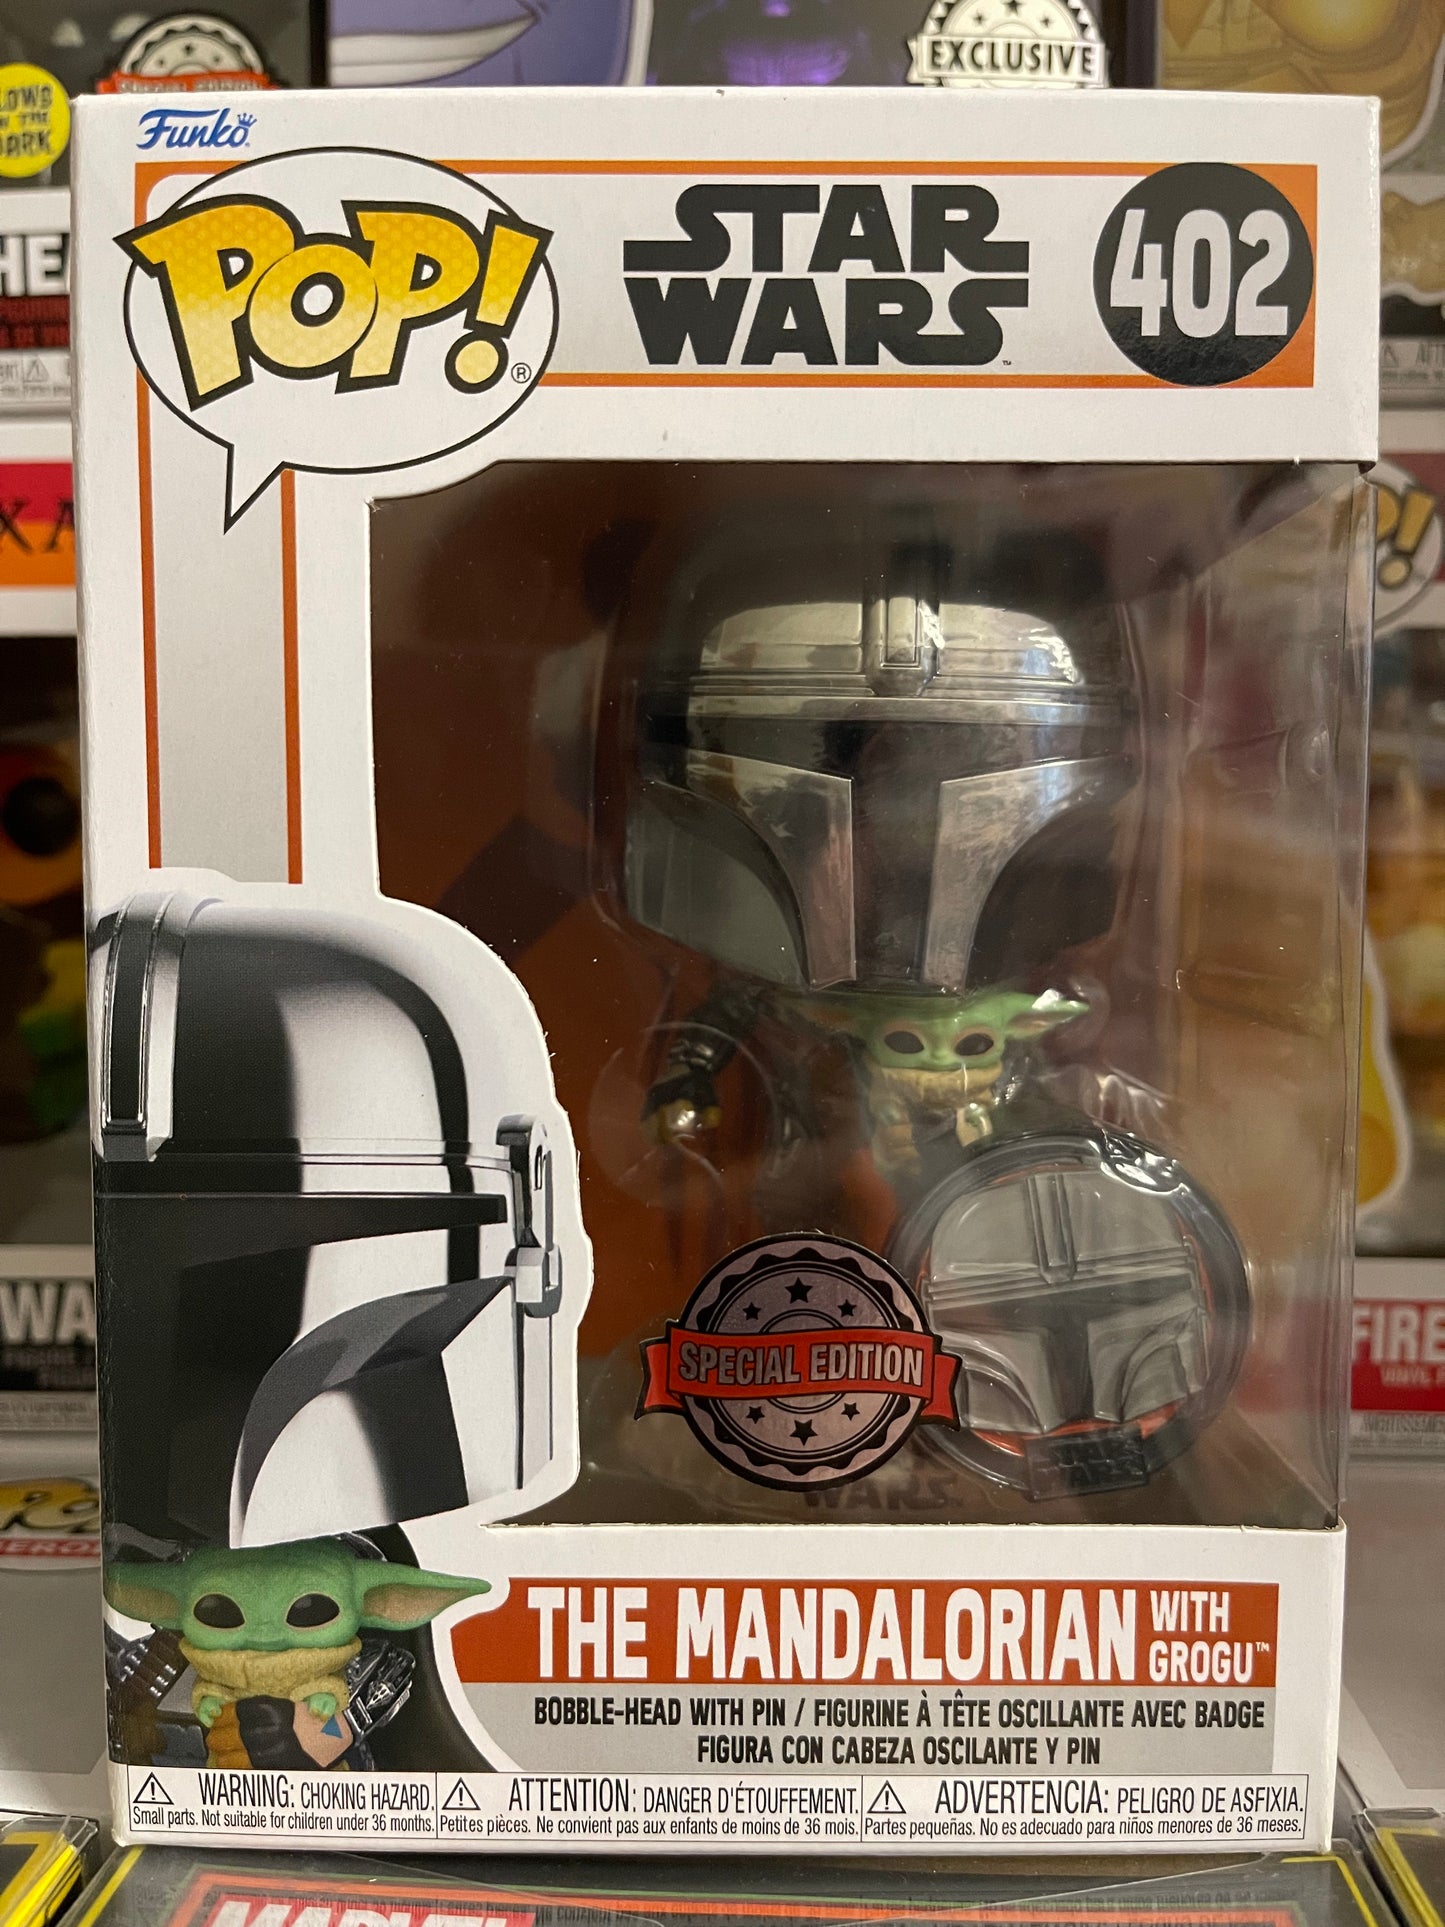 Buy Funko Pop! Star Wars The Mandalorian flying with The Child 402